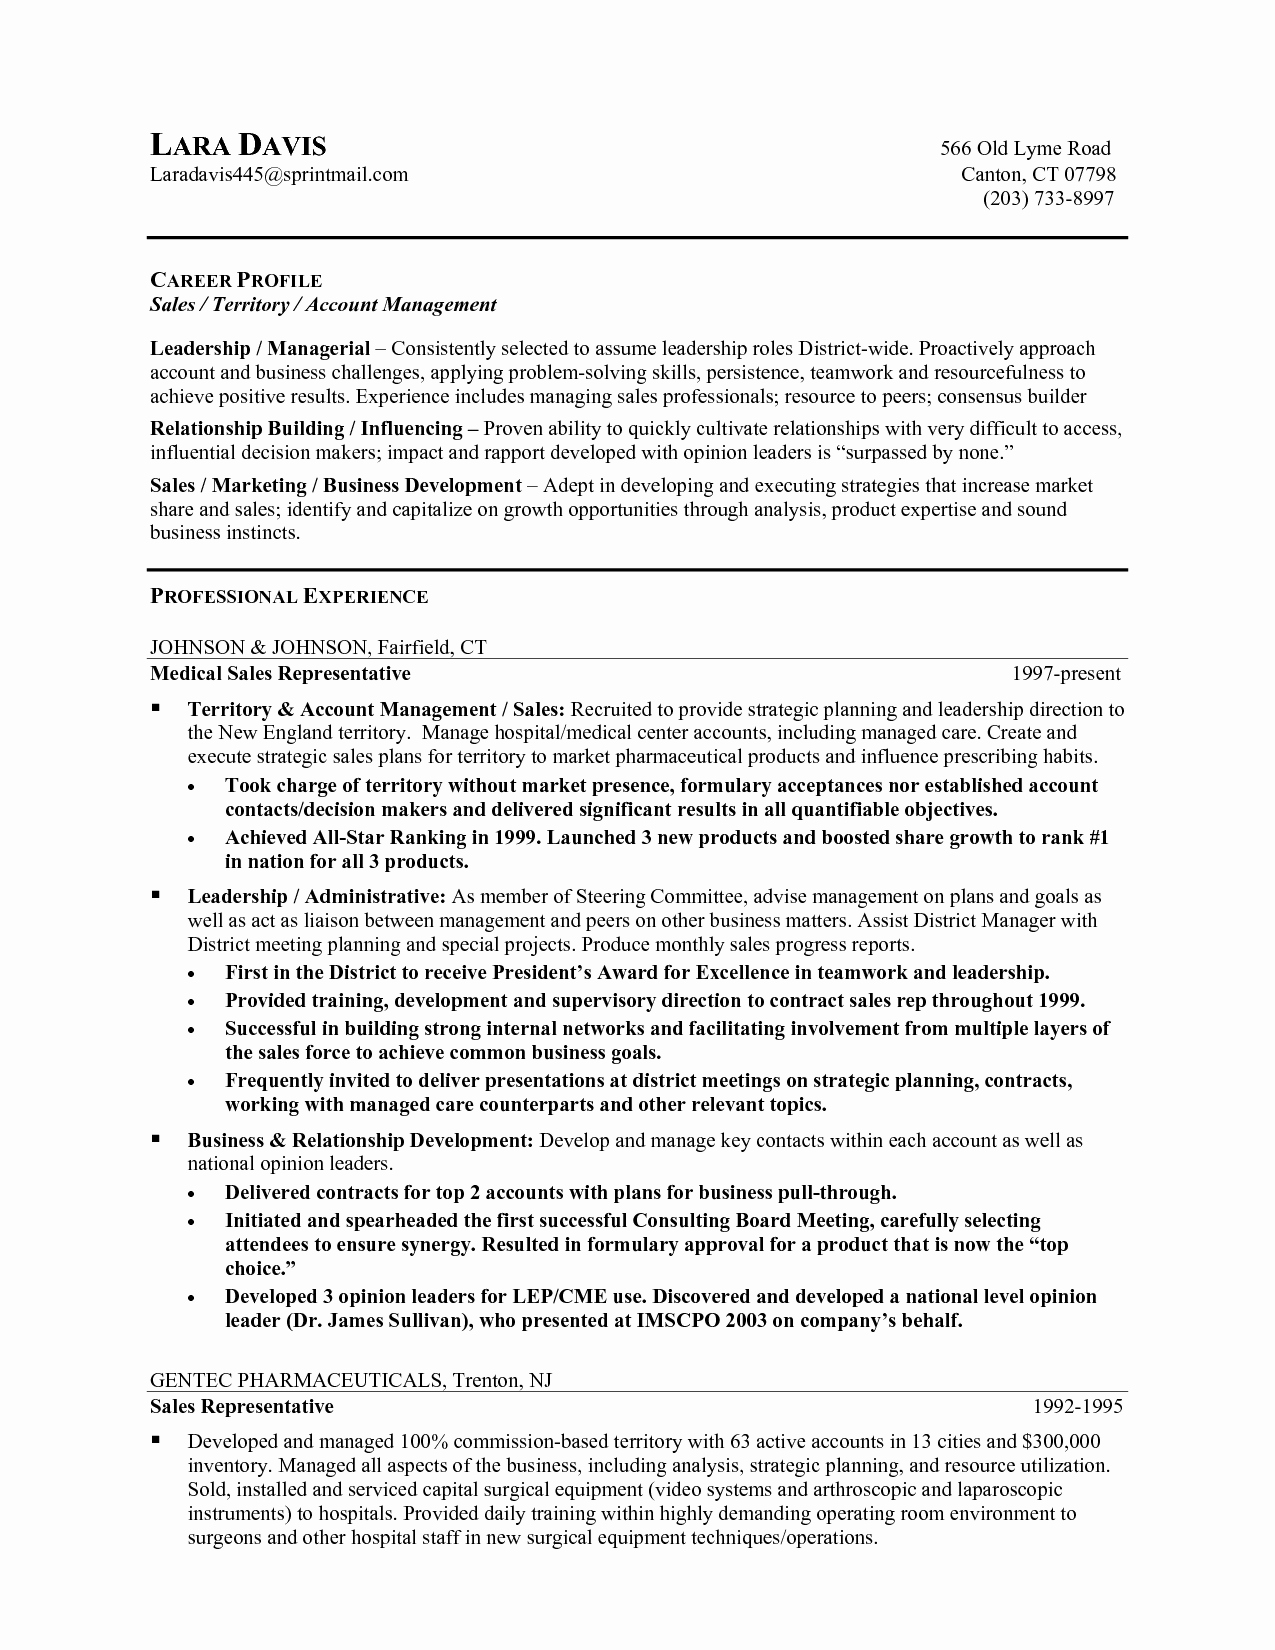 Two Things to Leave F A Resume